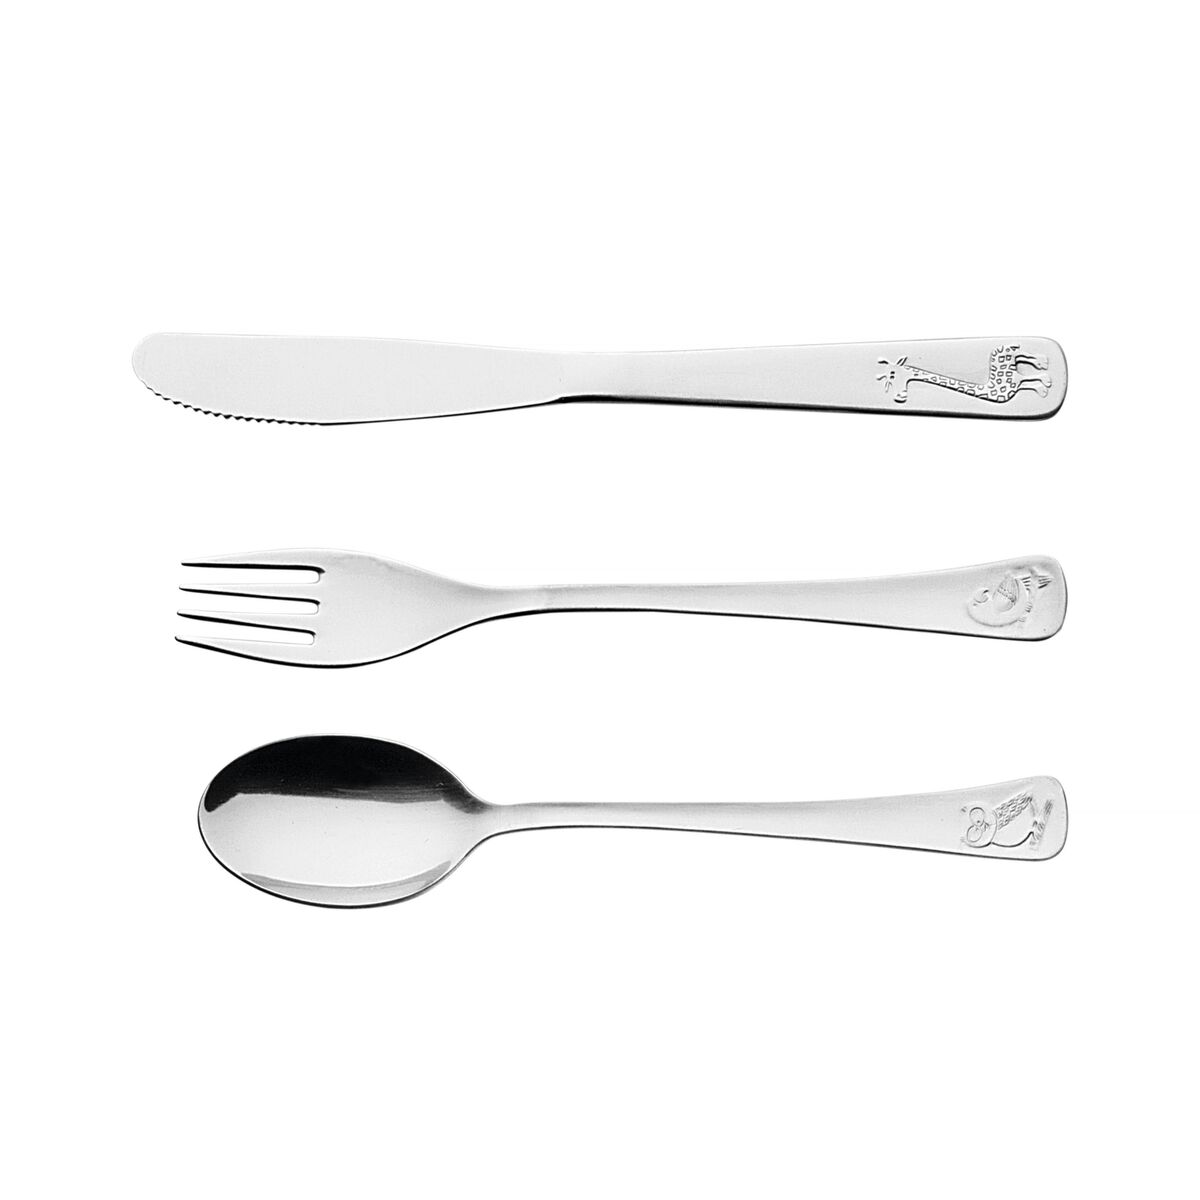 Tramontina Baby Friends stainless steel children's flatware set with shiny finish and relief design, 3 pc set